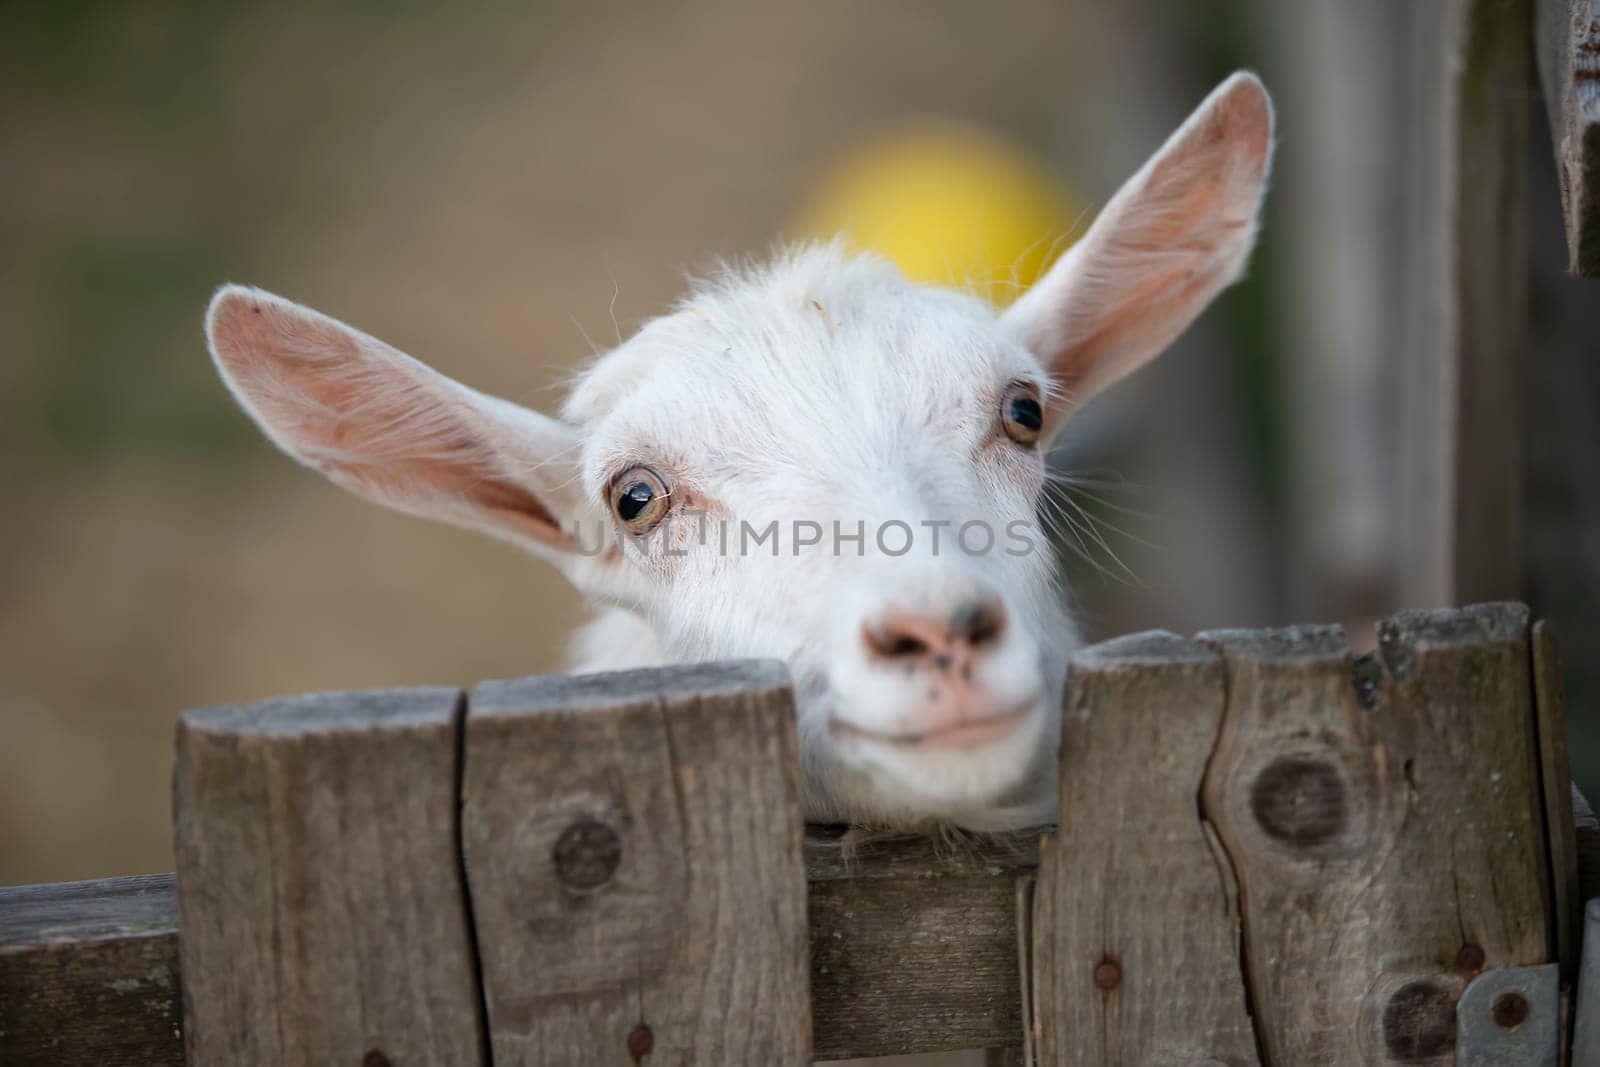 Goat on a rural farm close-up. A funny interested white goat without a horn peeks out from behind a wooden fence. The concept of farming and animal husbandry. Agriculture and dairy production. by Sviatlana